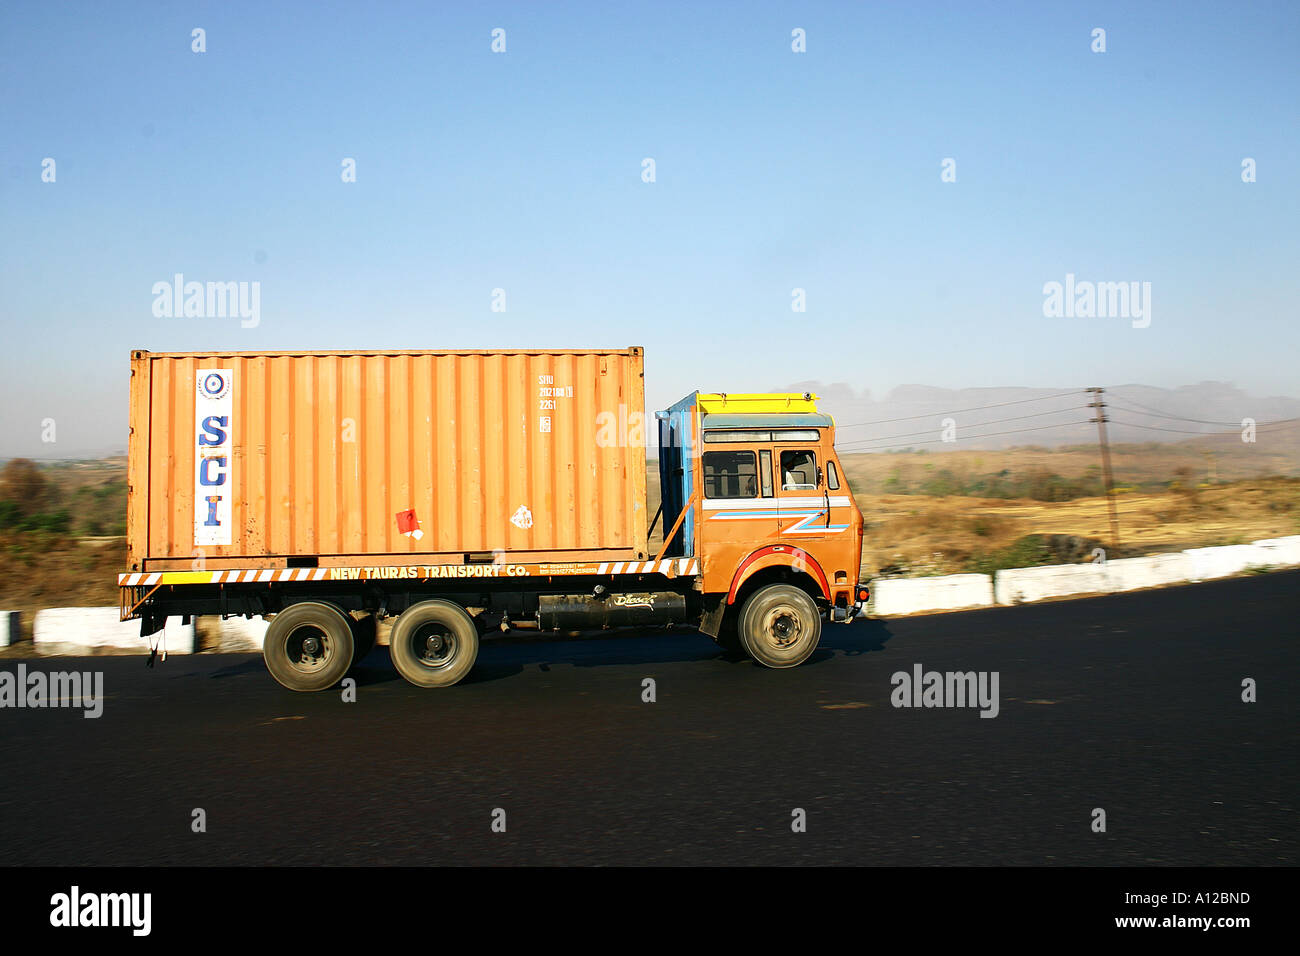 transportation container truck on road, India Stock Photo